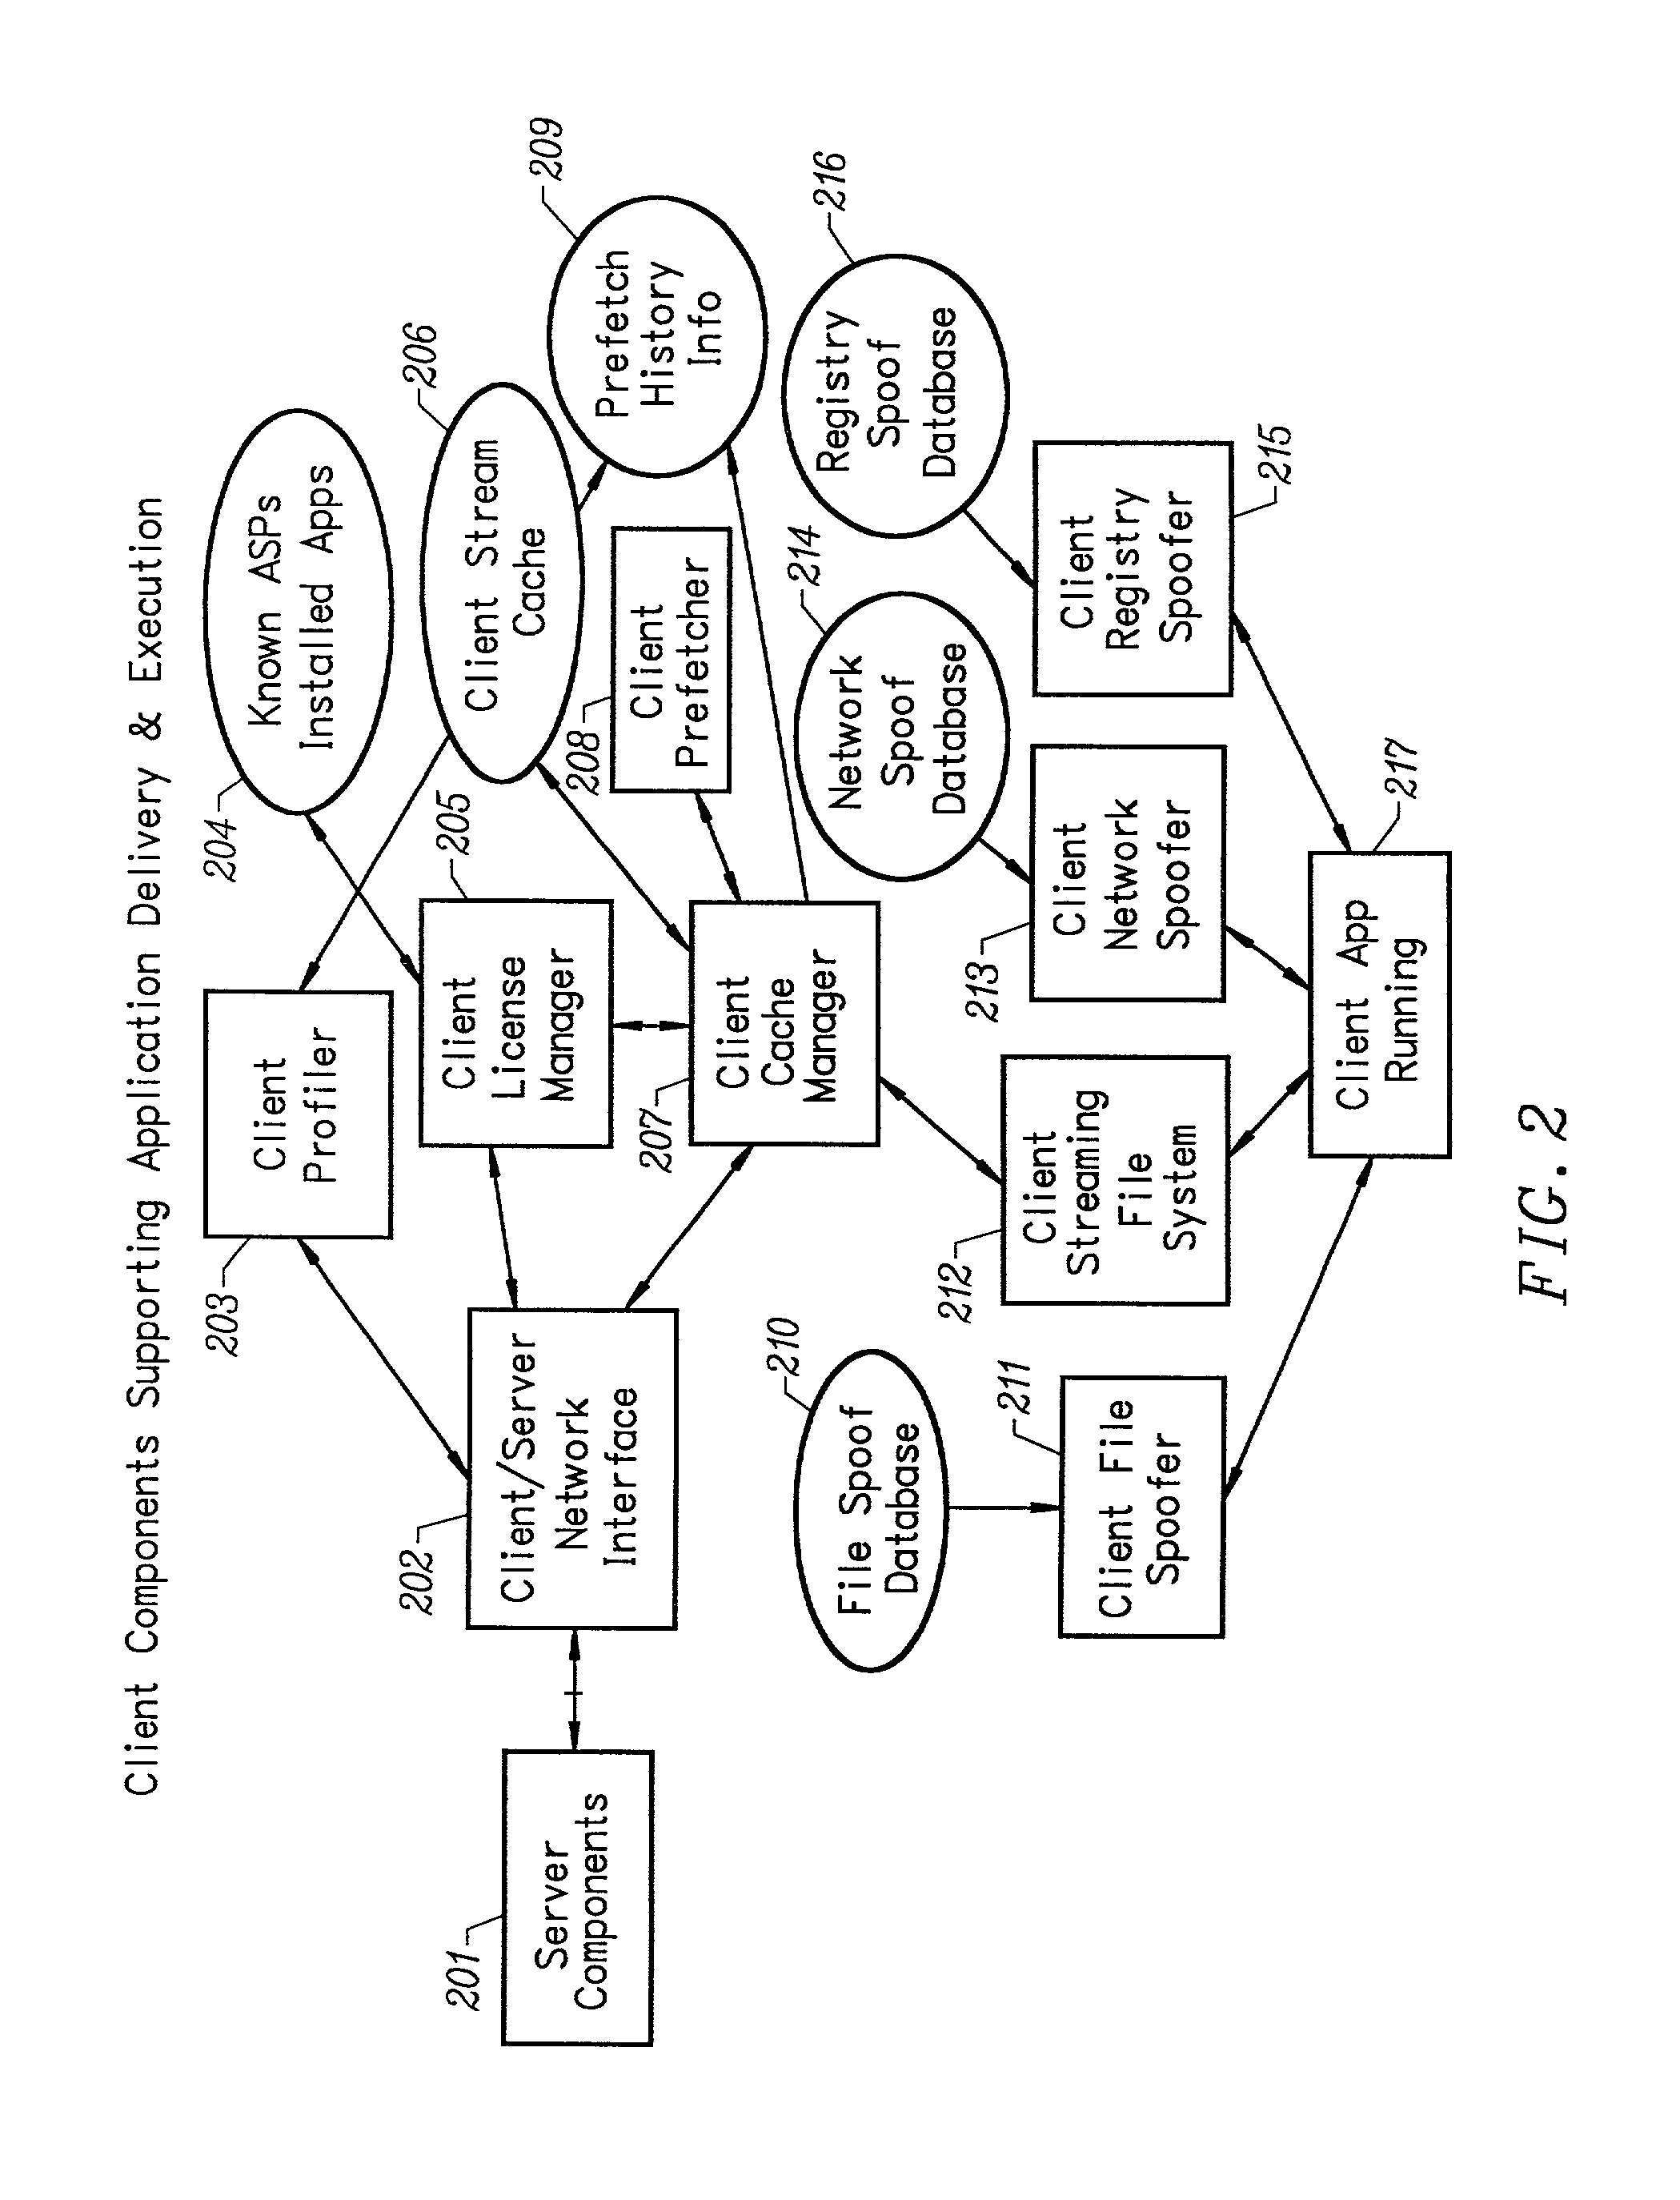 Conventionally coded application conversion system for streamed delivery and execution